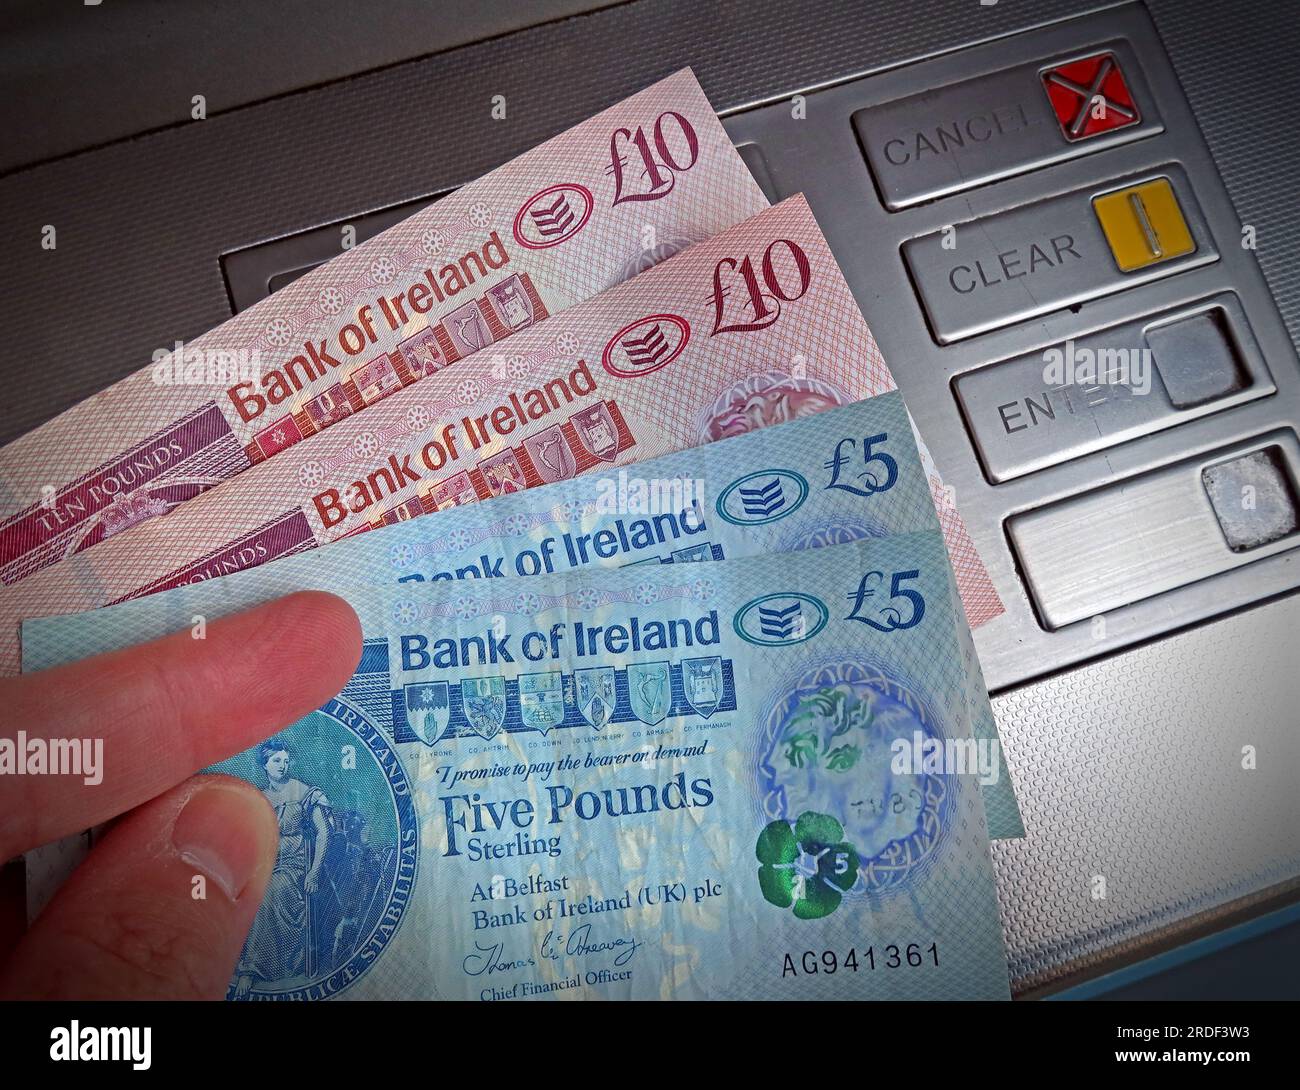 Bank of Ireland northern Irish Sterling cash notes dispensed from an ATM cash machine,1,Donegall Square South, Belfast, BT1 5LR, Co. Antrim, NI BT15LR Stock Photo